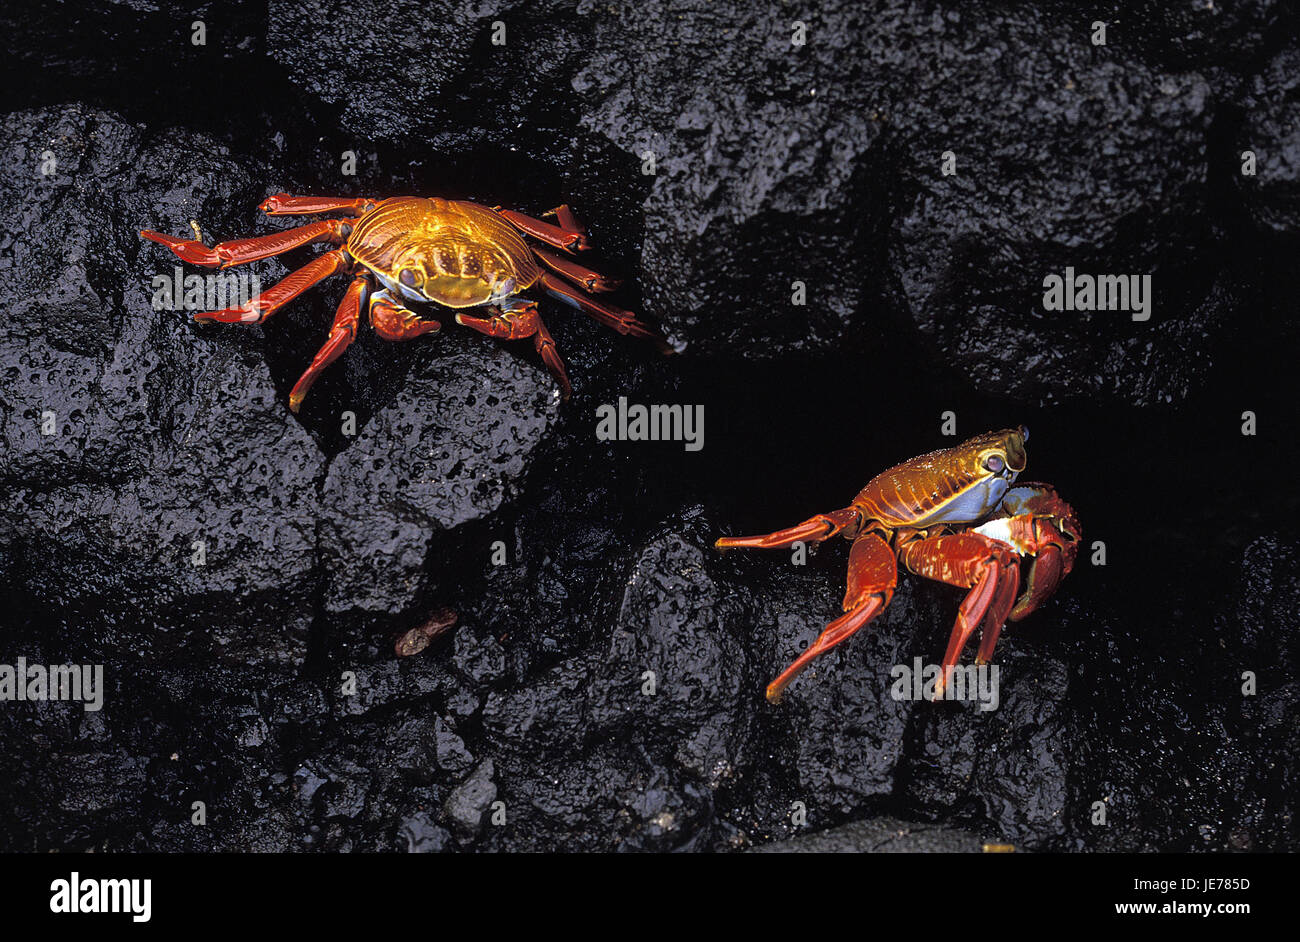 Red cliff crabs, Grapsus grapsus, adult animals, rocks, the Galapagos Islands, Stock Photo